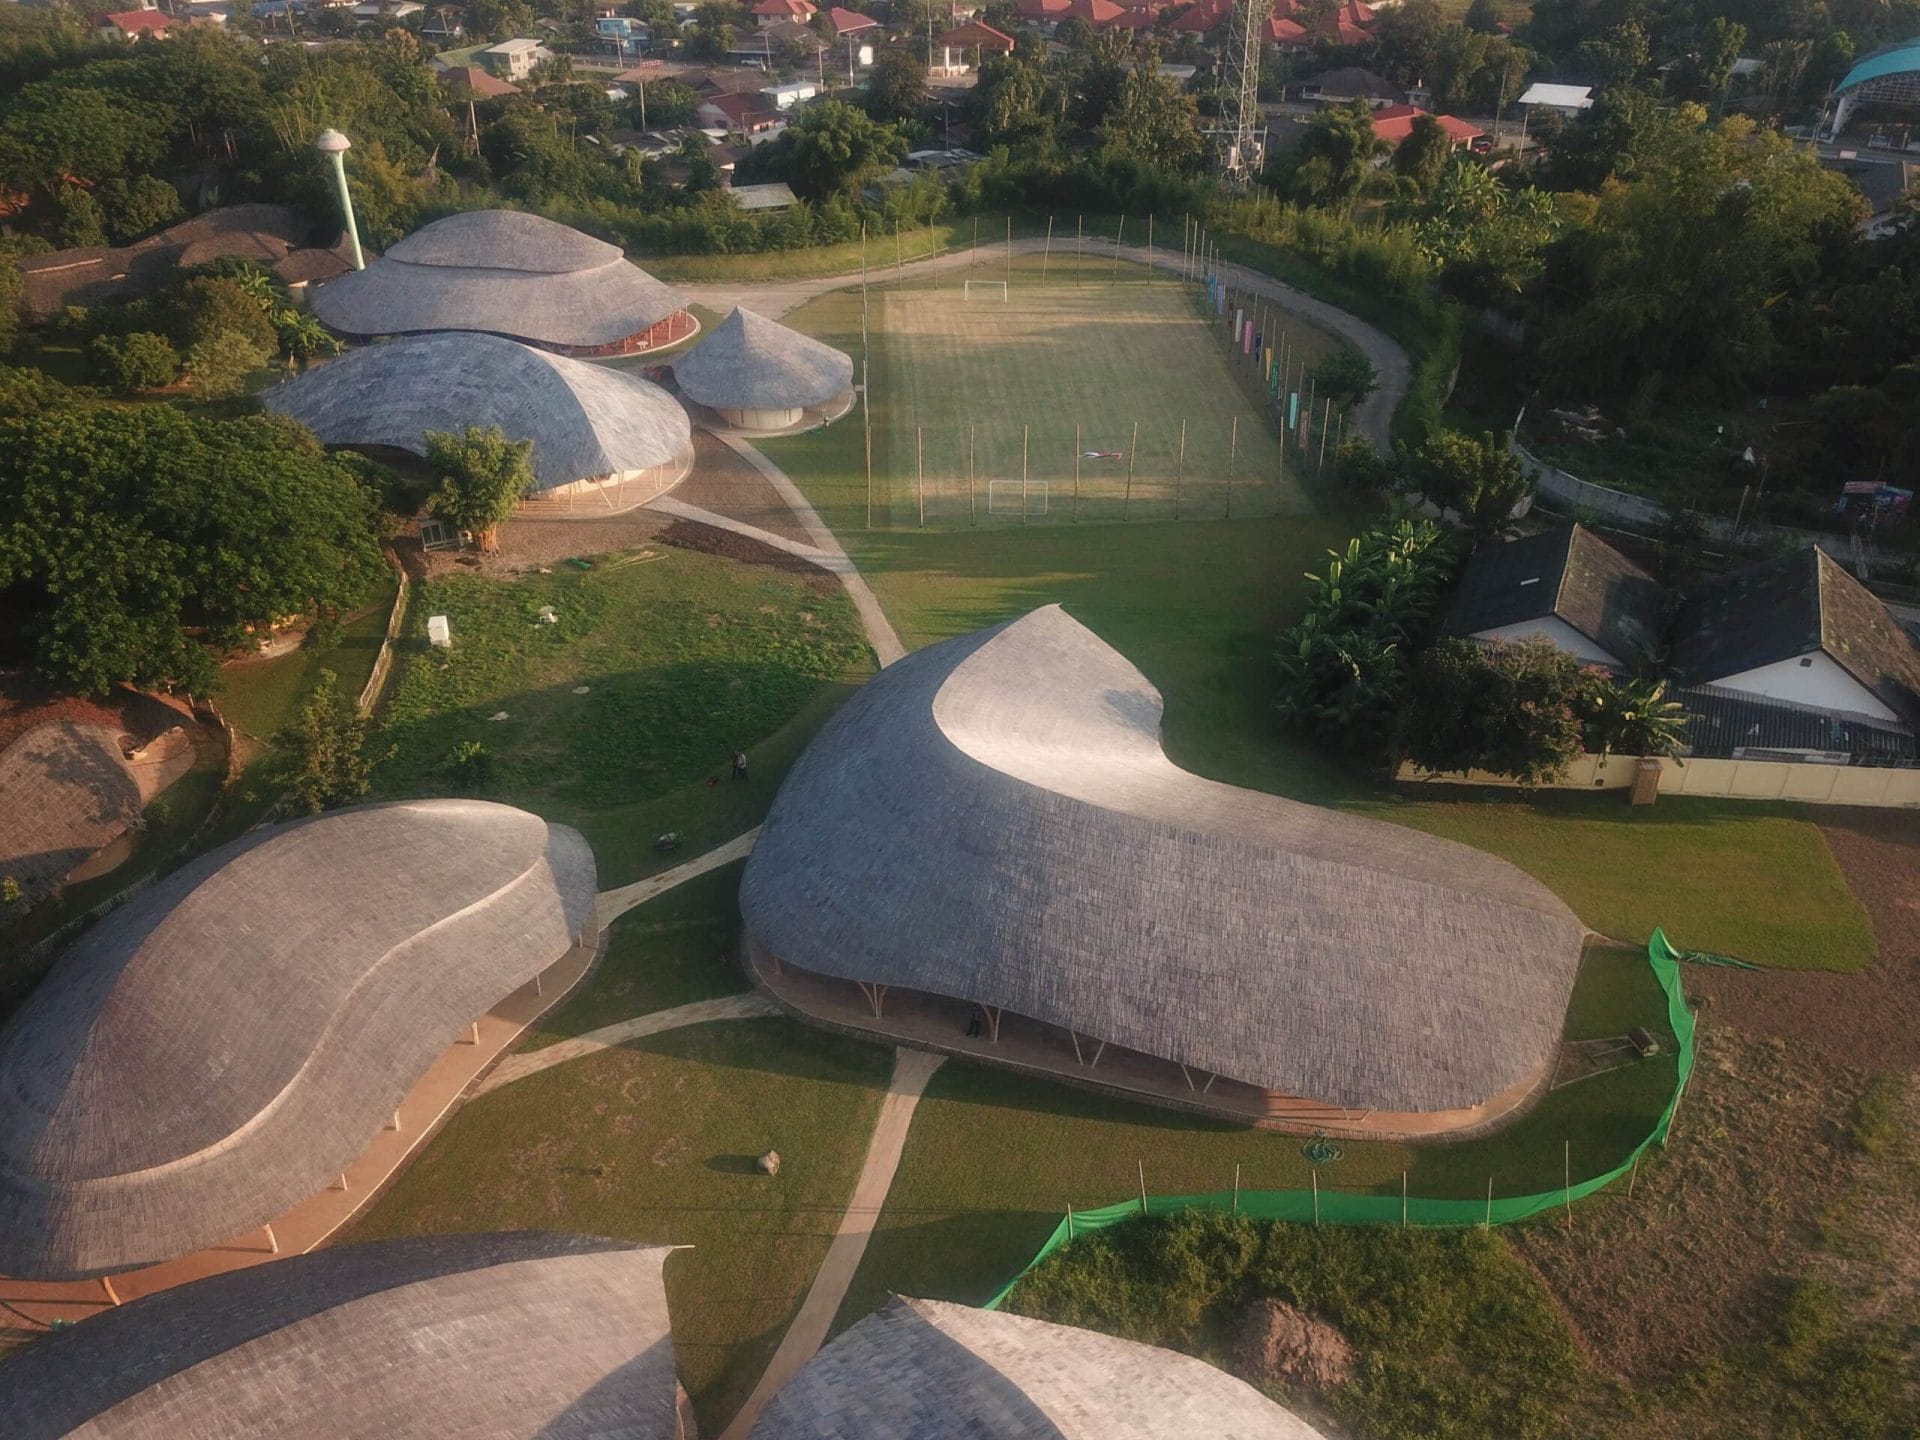 Science Labs & Music Center designed by Chiangmai Life Architects